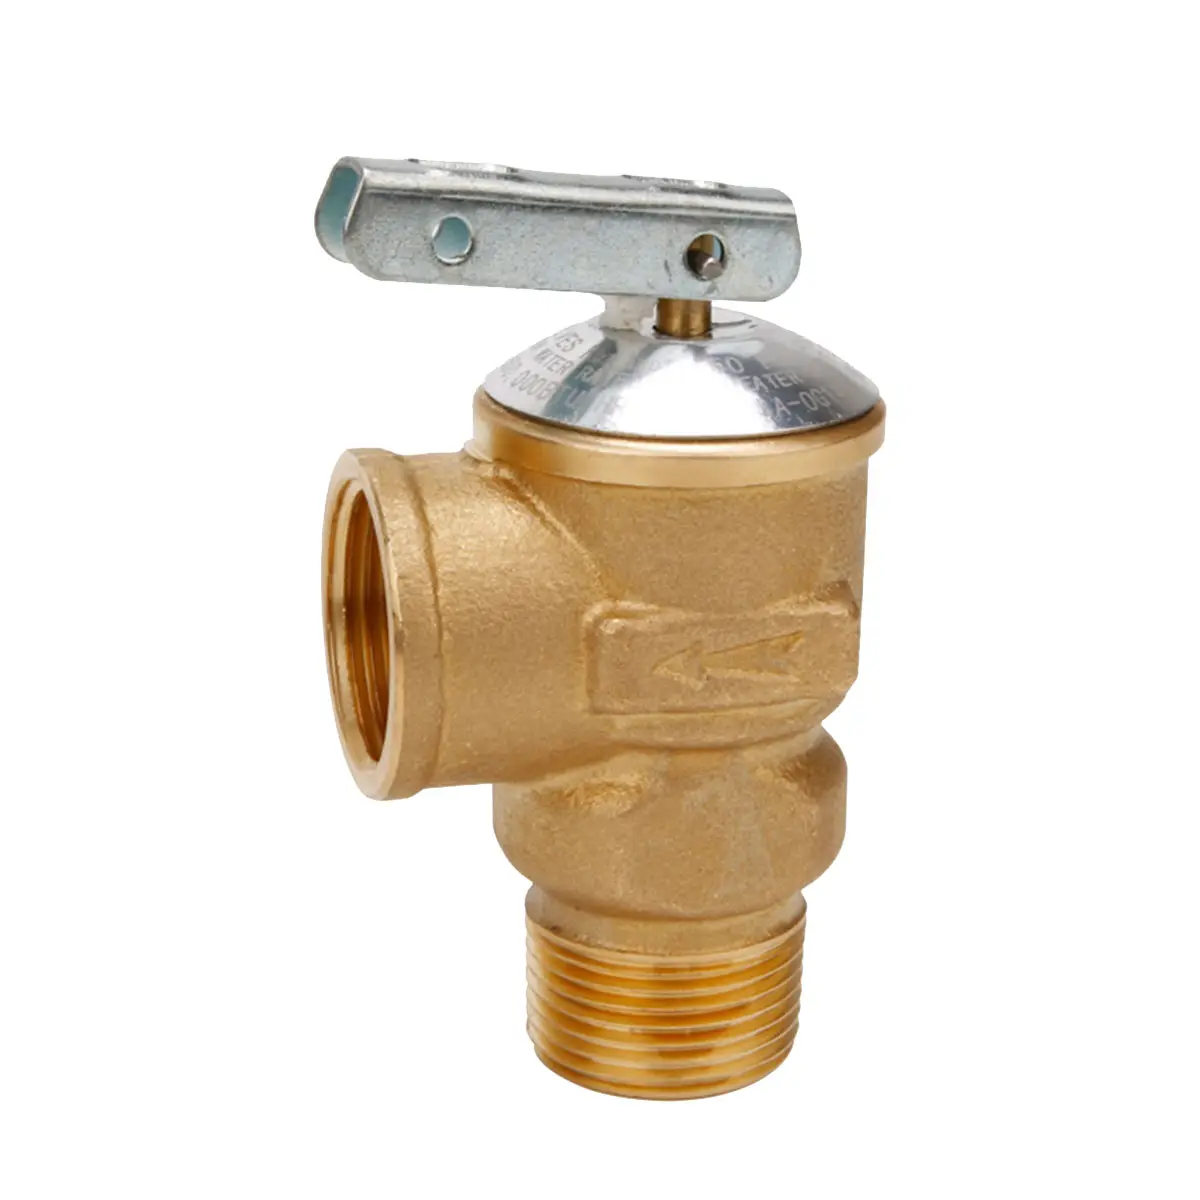 Low lead brass safety valve NPT water heater with American standard 150psi pressure reducing valve throttling